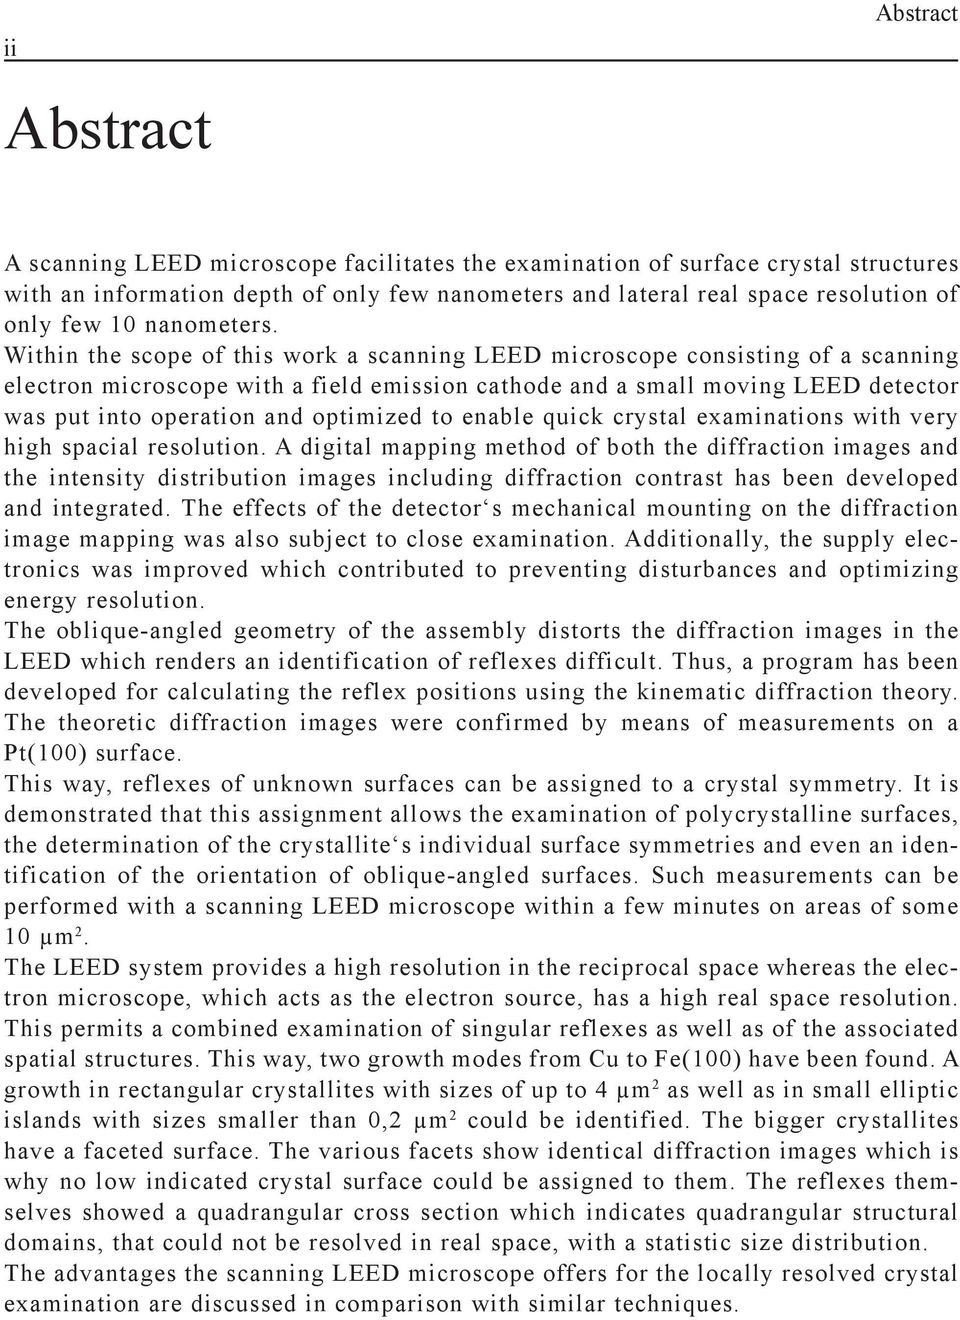 Within the scope of this work a scanning LEED microscope consisting of a scanning electron microscope with a field emission cathode and a small moving LEED detector was put into operation and